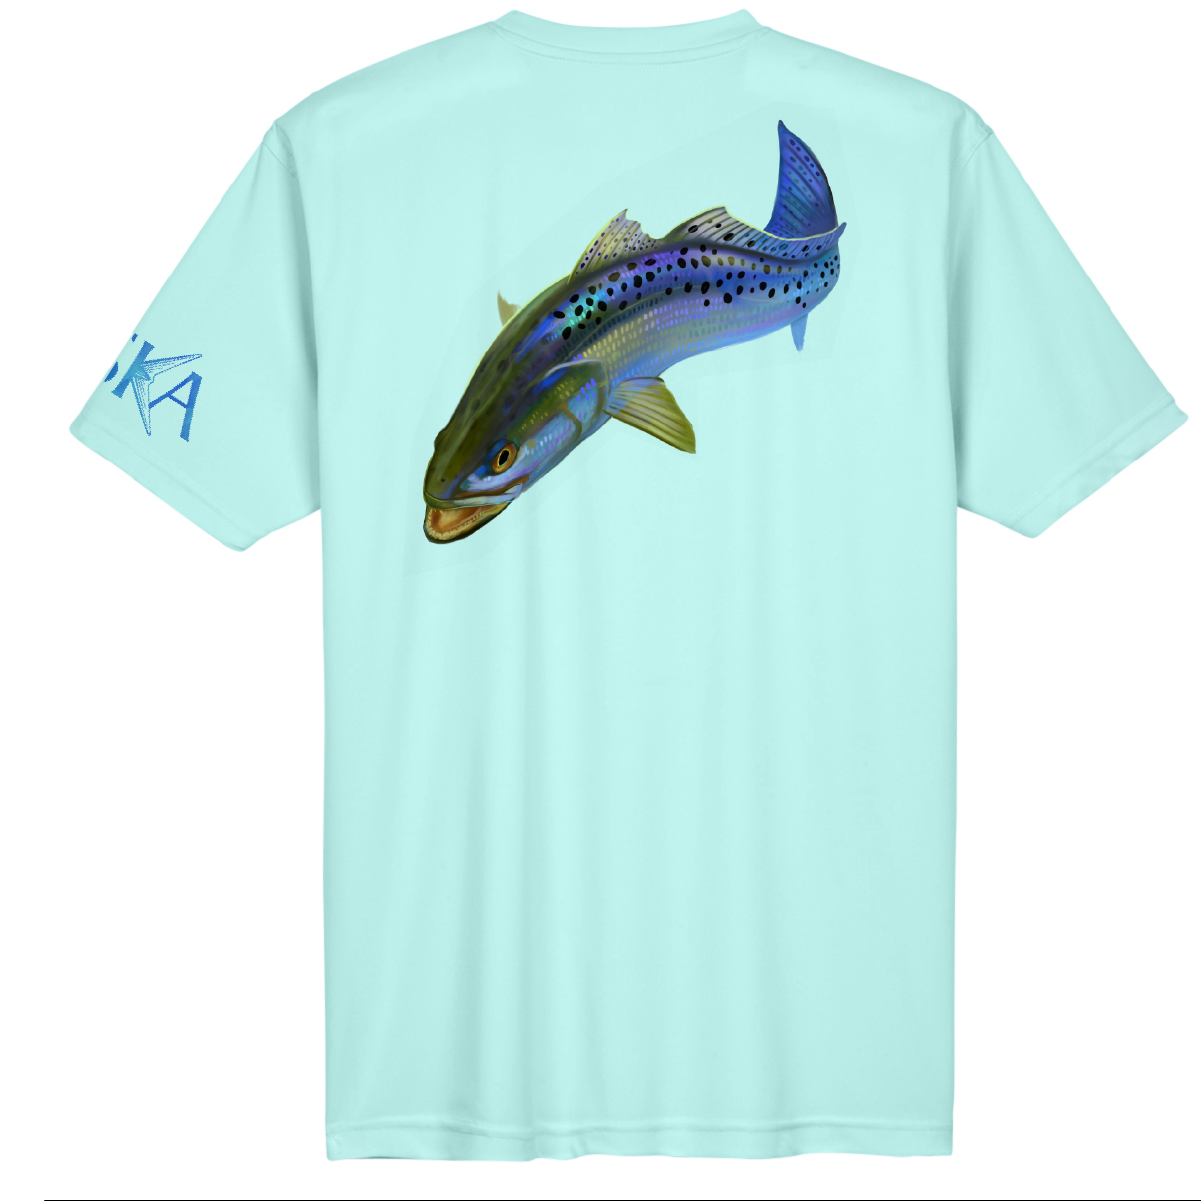 Trout Short-Sleeve Dry-Fit Shirt